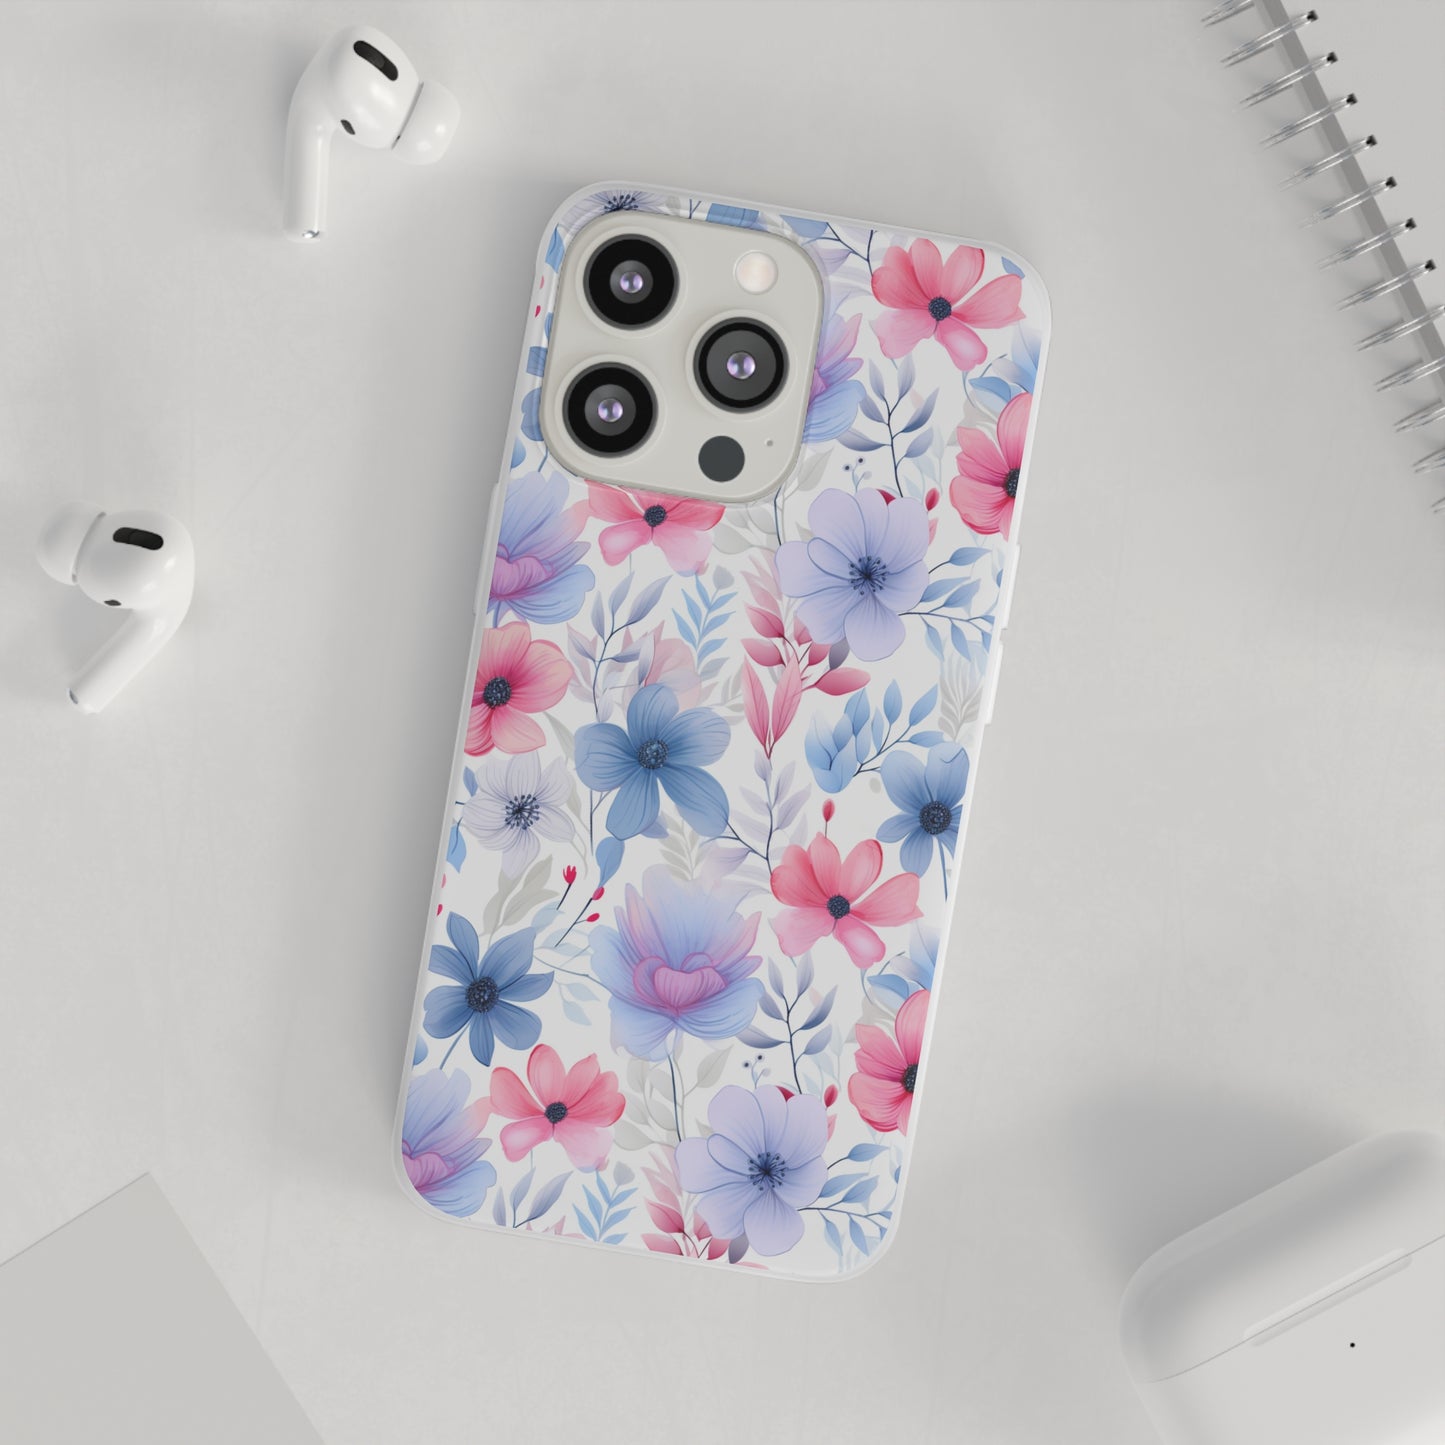 Floral Whispers - Soft Hues of Violets, Pinks, and Blues - Flexi Phone Case Phone Case Pattern Symphony iPhone 13 Pro with gift packaging  